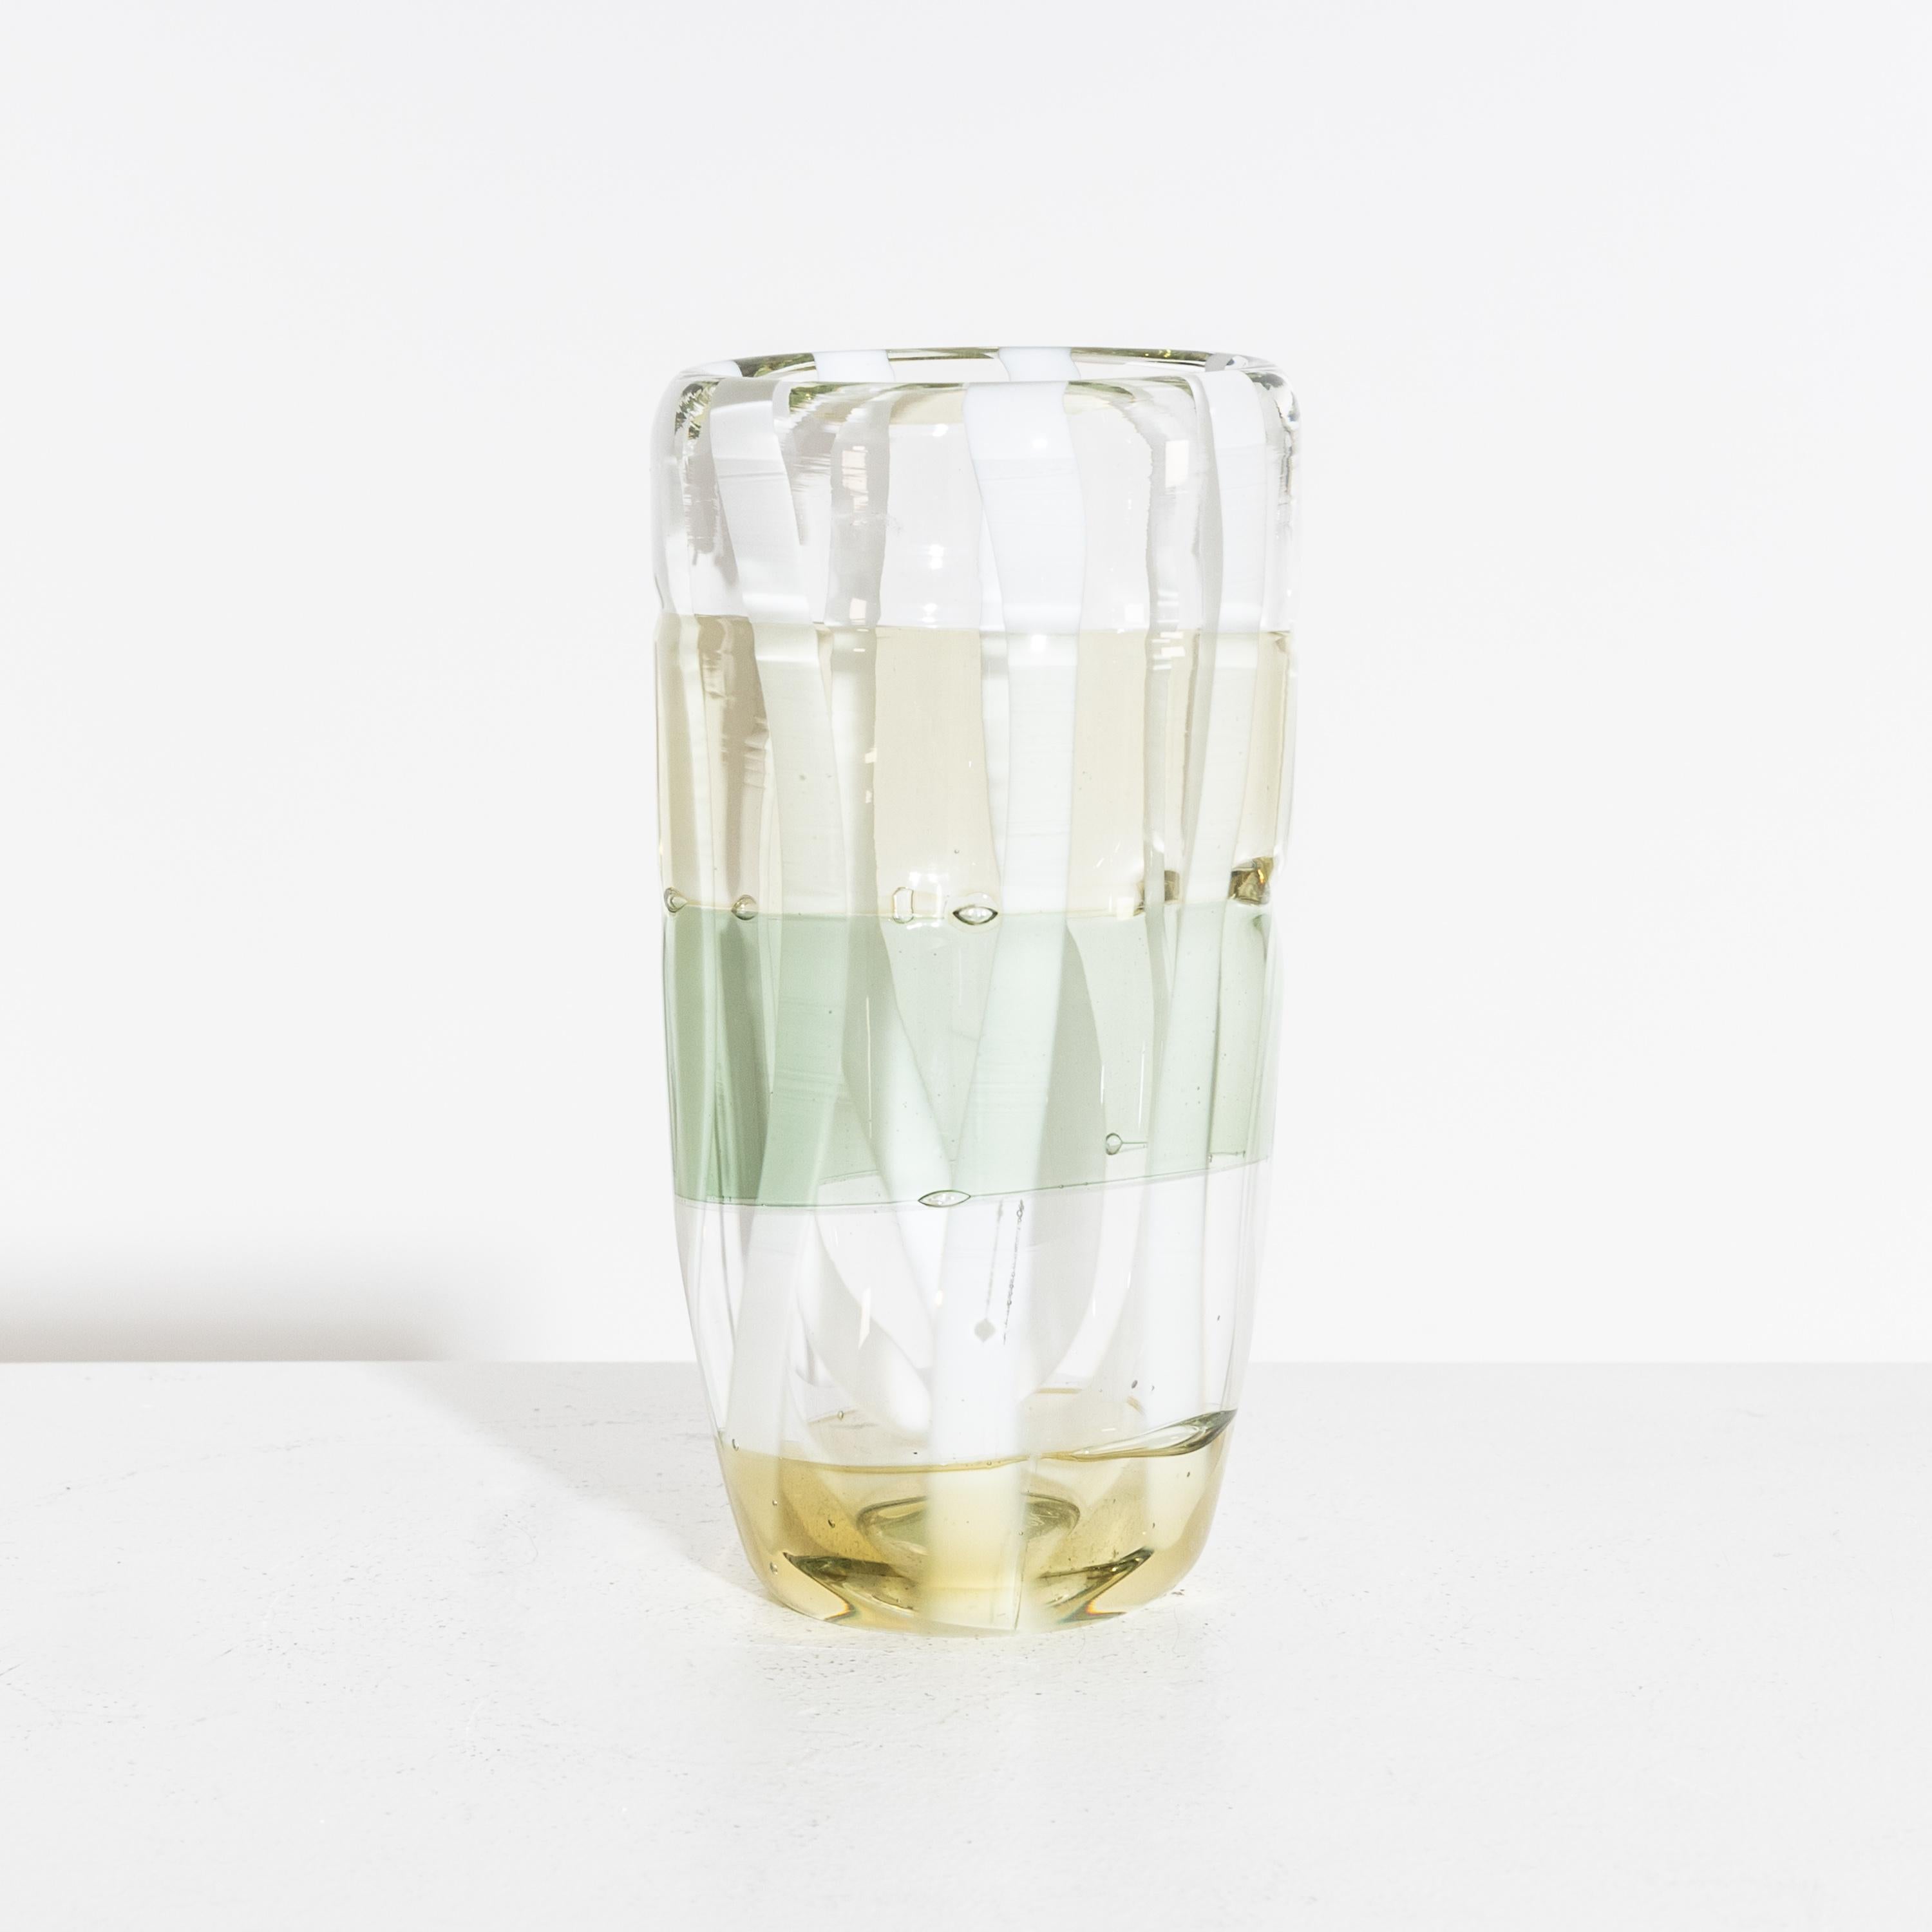 A small art glass vase by Martin Potsch.
Vase with clear, yellow, green and, white.